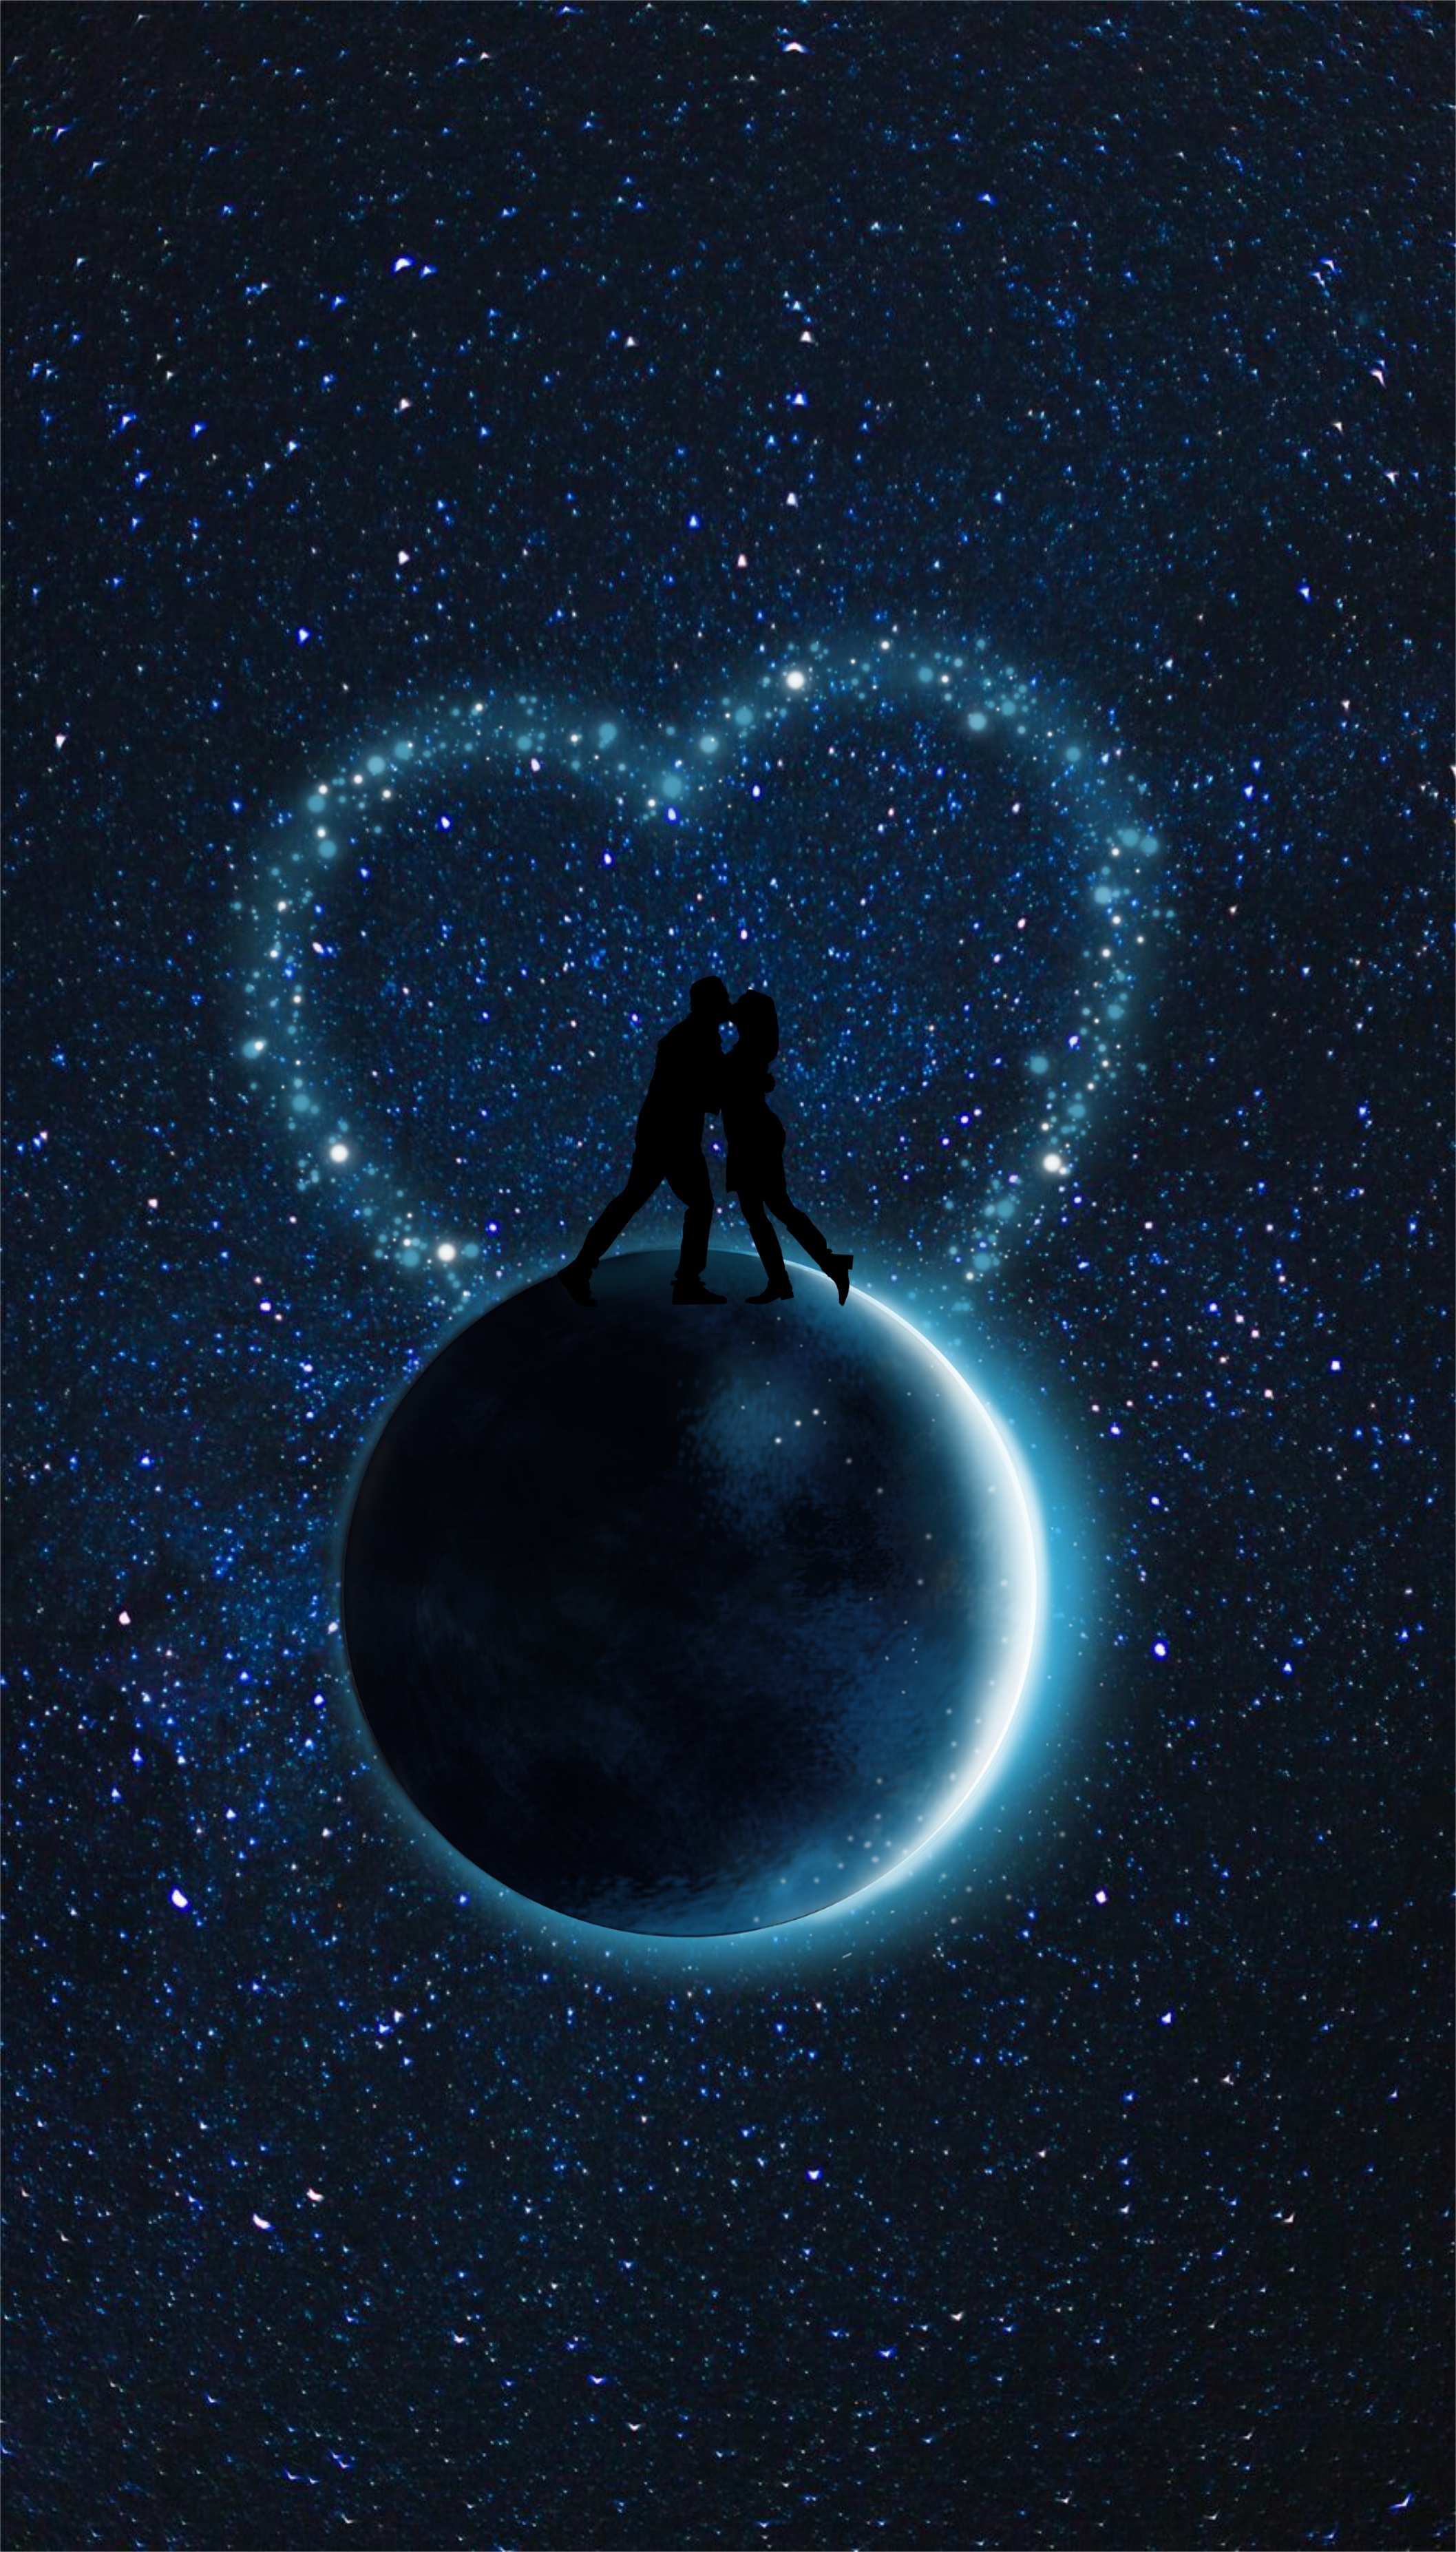 couple, love, pair, vector, silhouettes, starry sky, planet